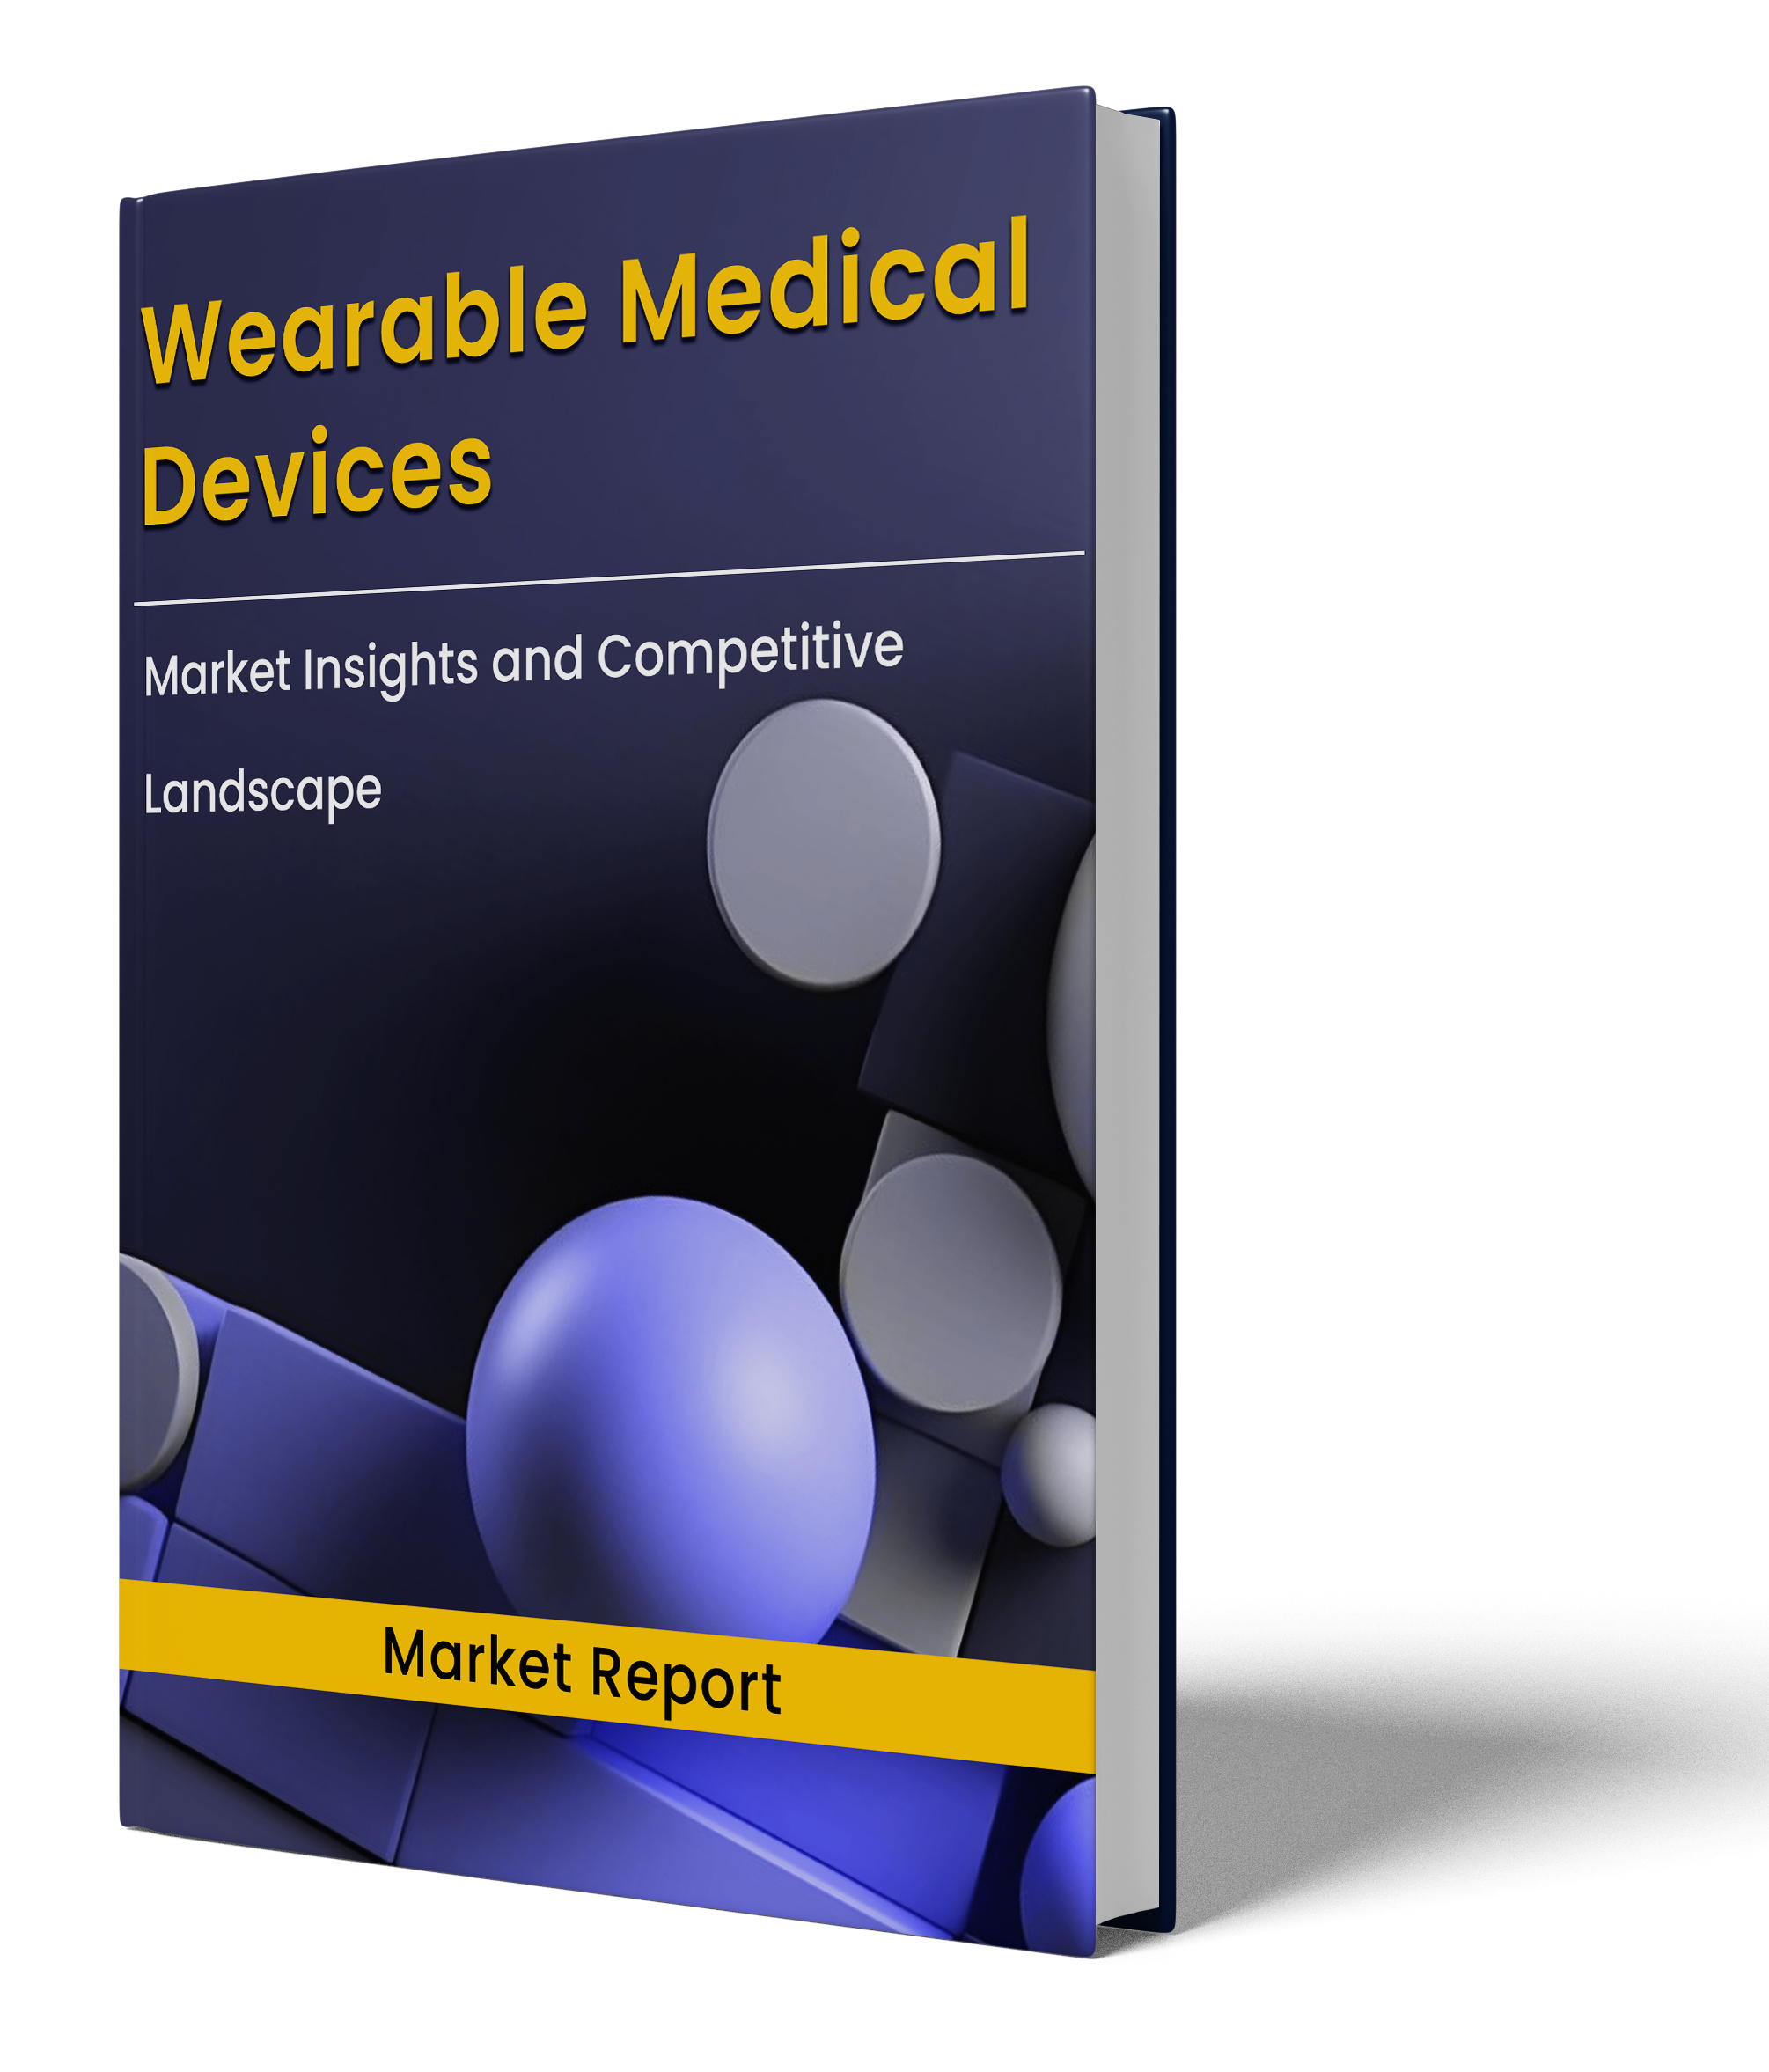 Wearable Medical Devices Market Report